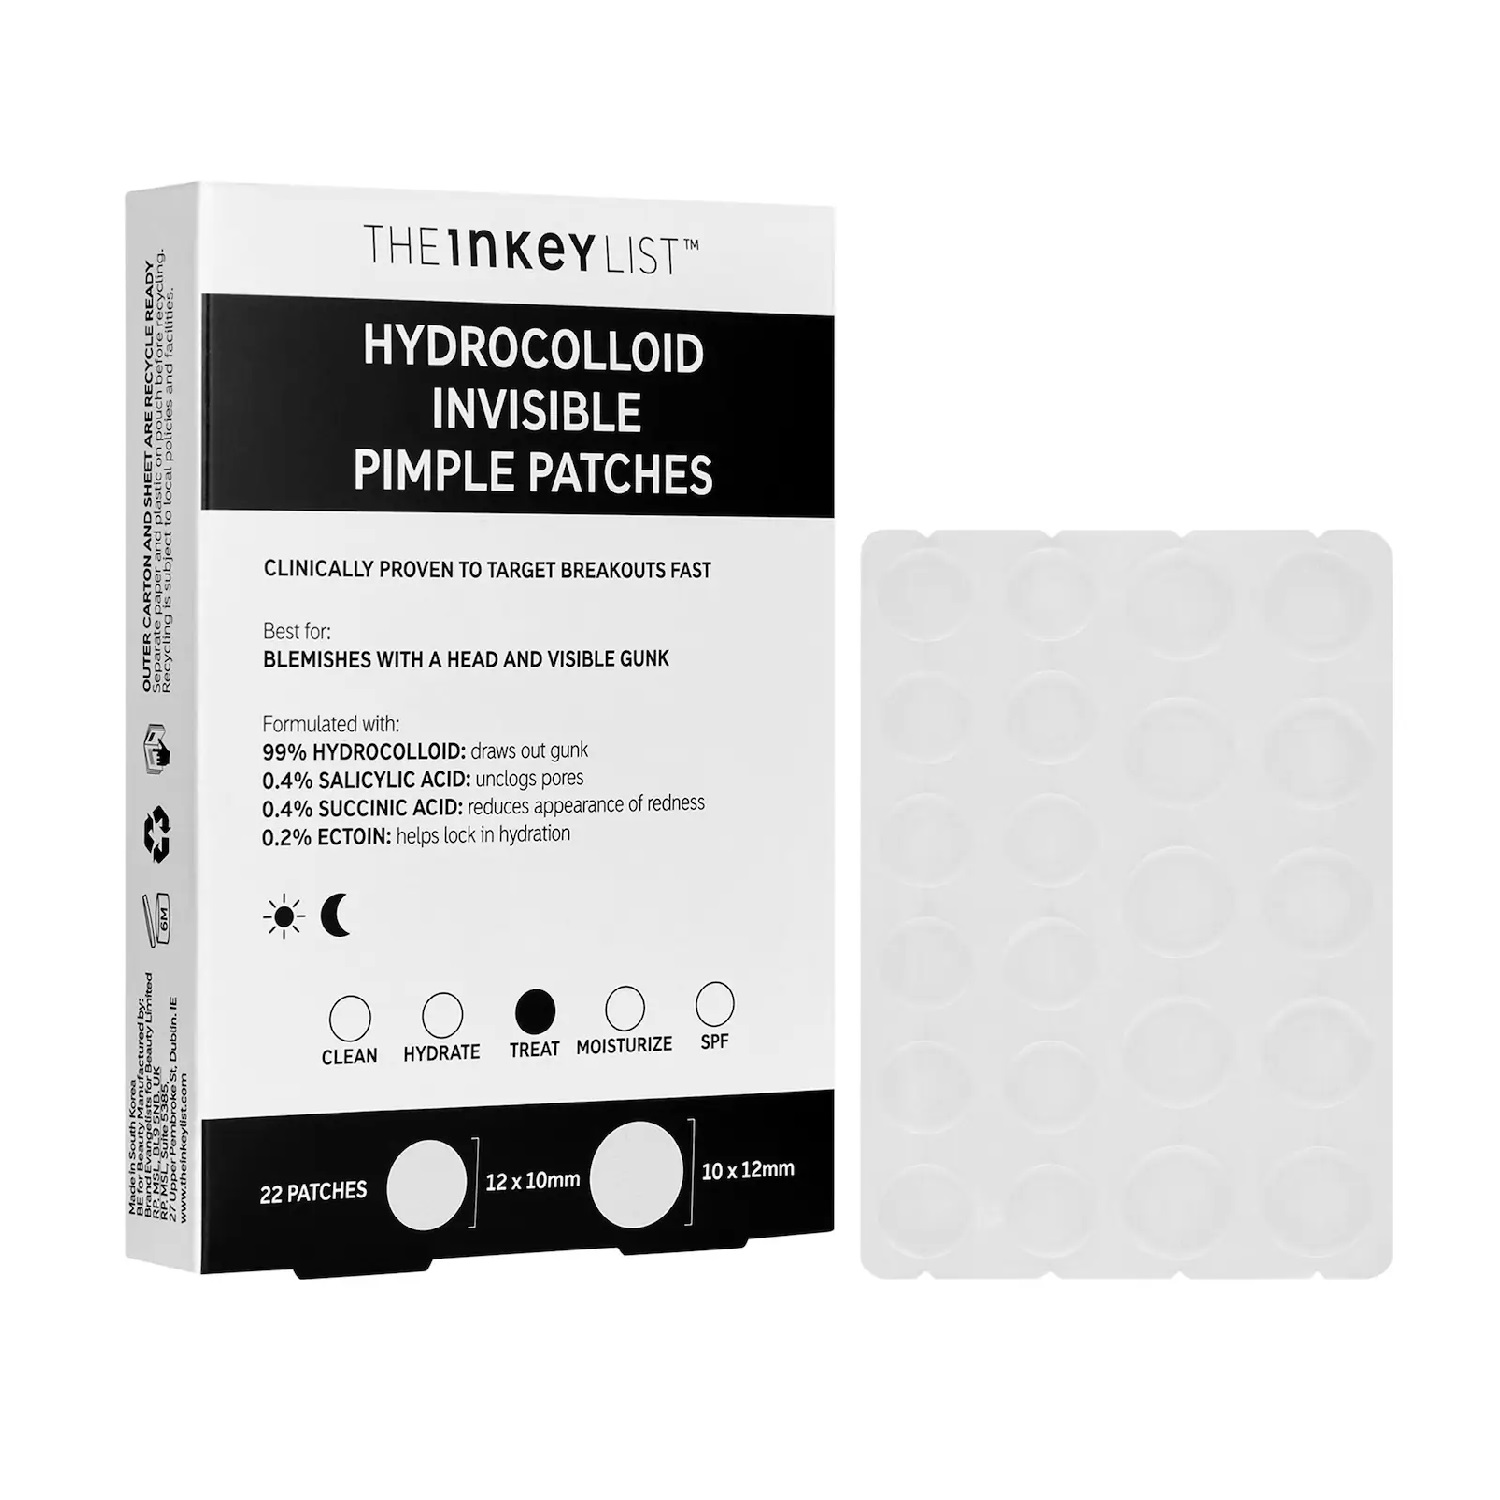 HYDROCOLLOID INVISIBLE PIMPLE PATCHES (PARCHES INVISIBLES PARA ACNÉ)